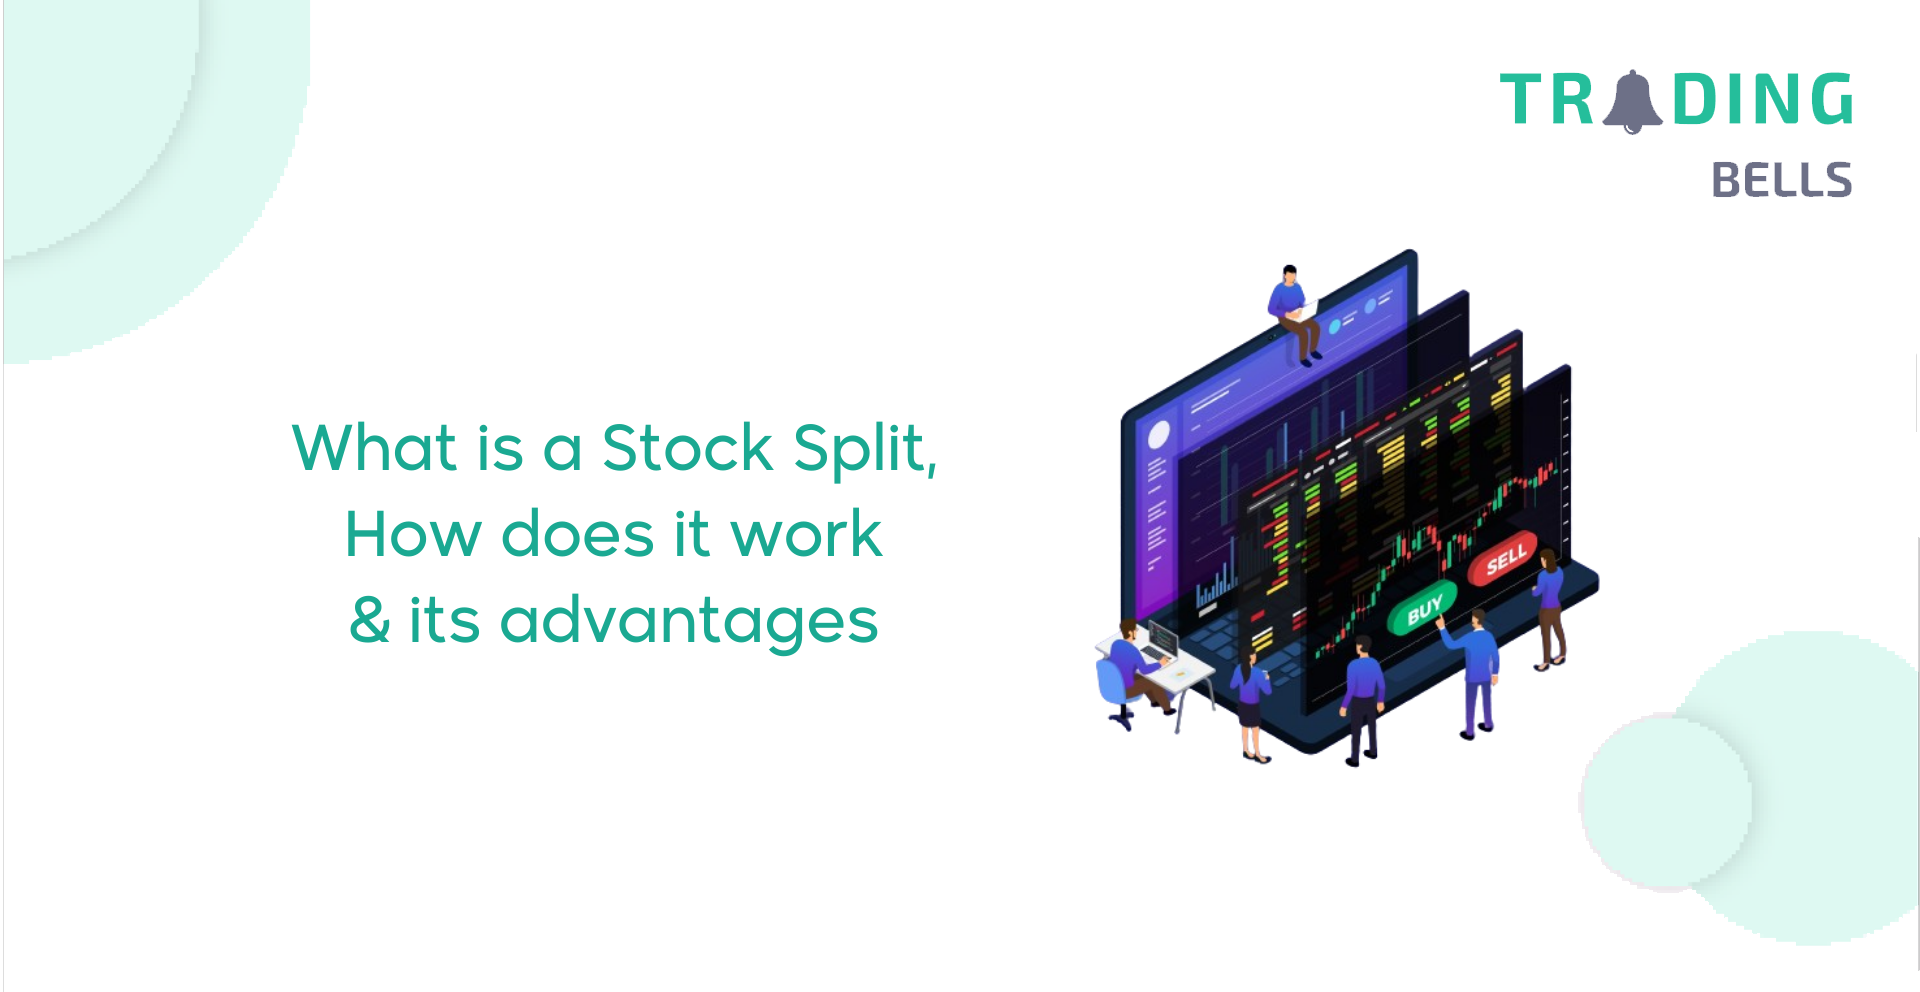 What is a Stock Split, how does it work, and its advantages